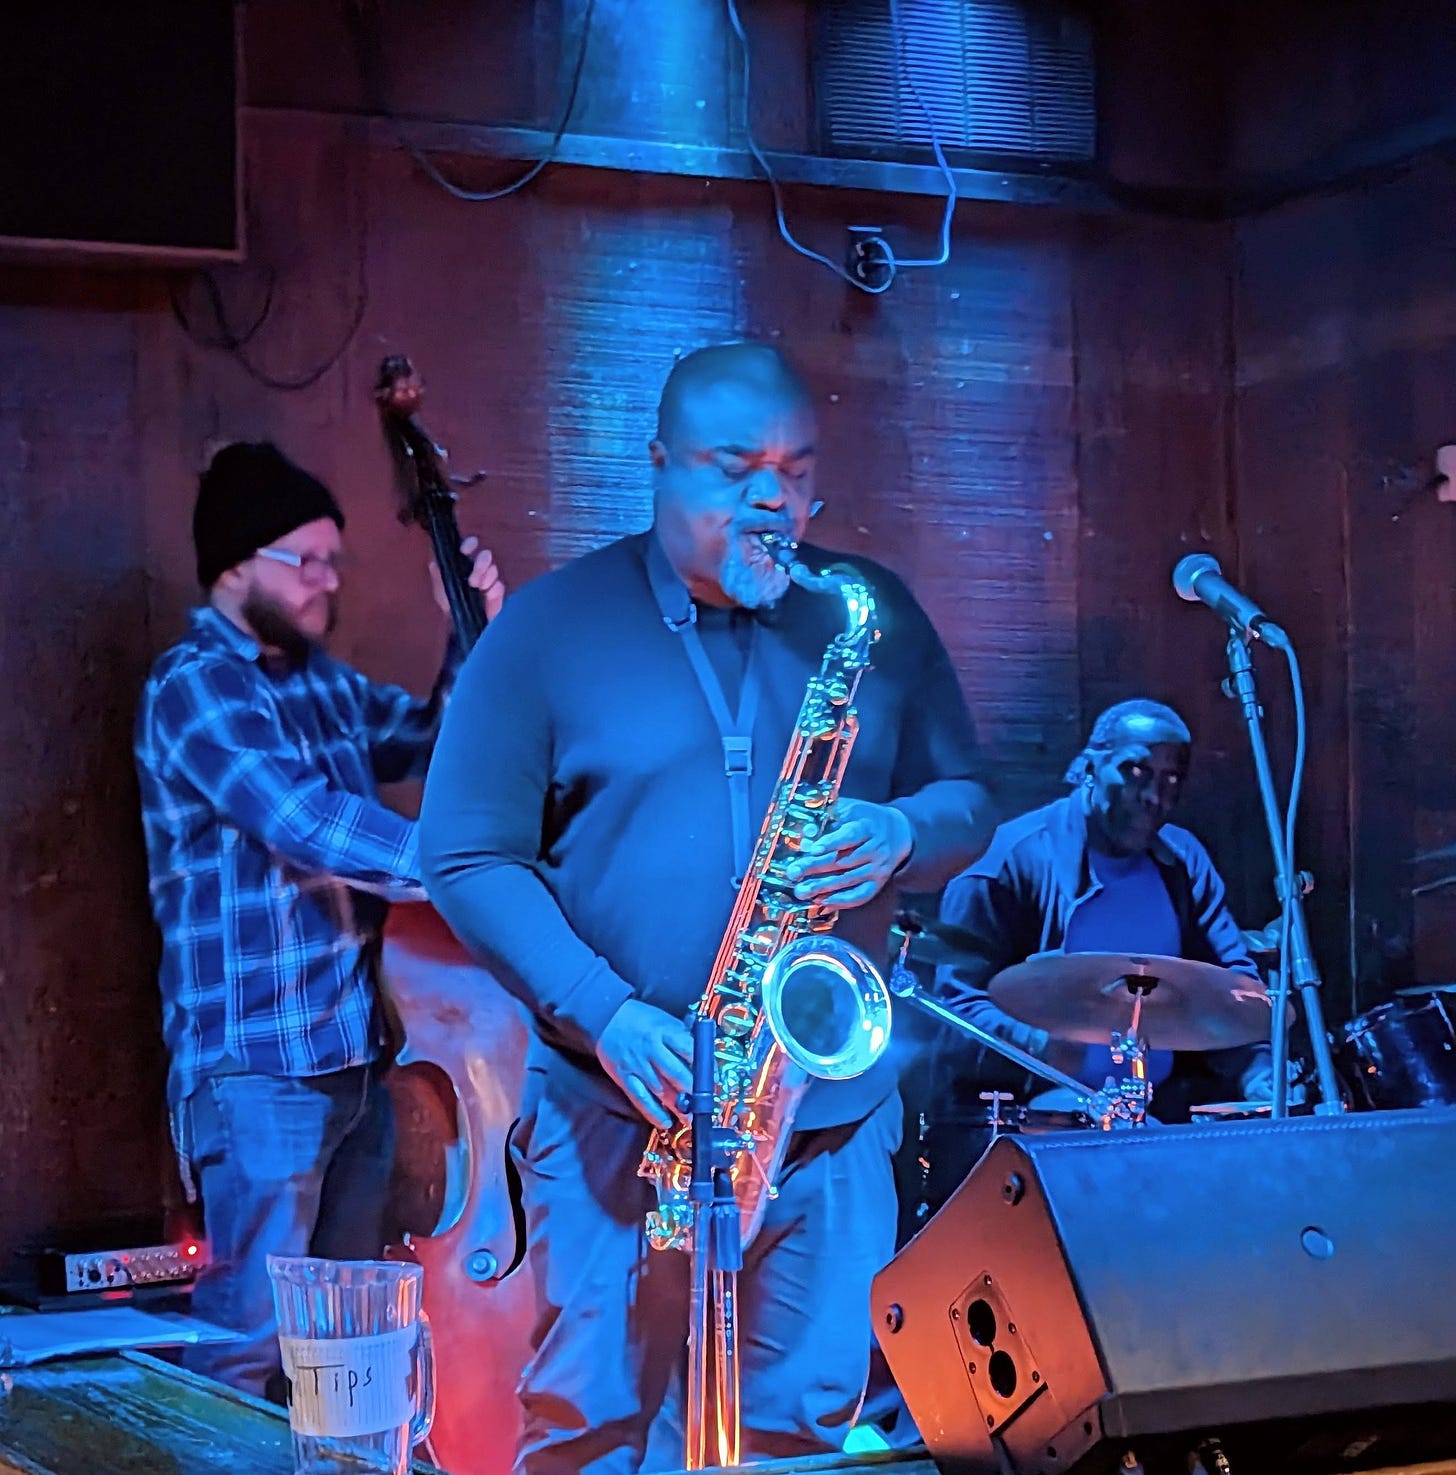 Saxophonist in the foreground, flanked by upright bassist and drummer